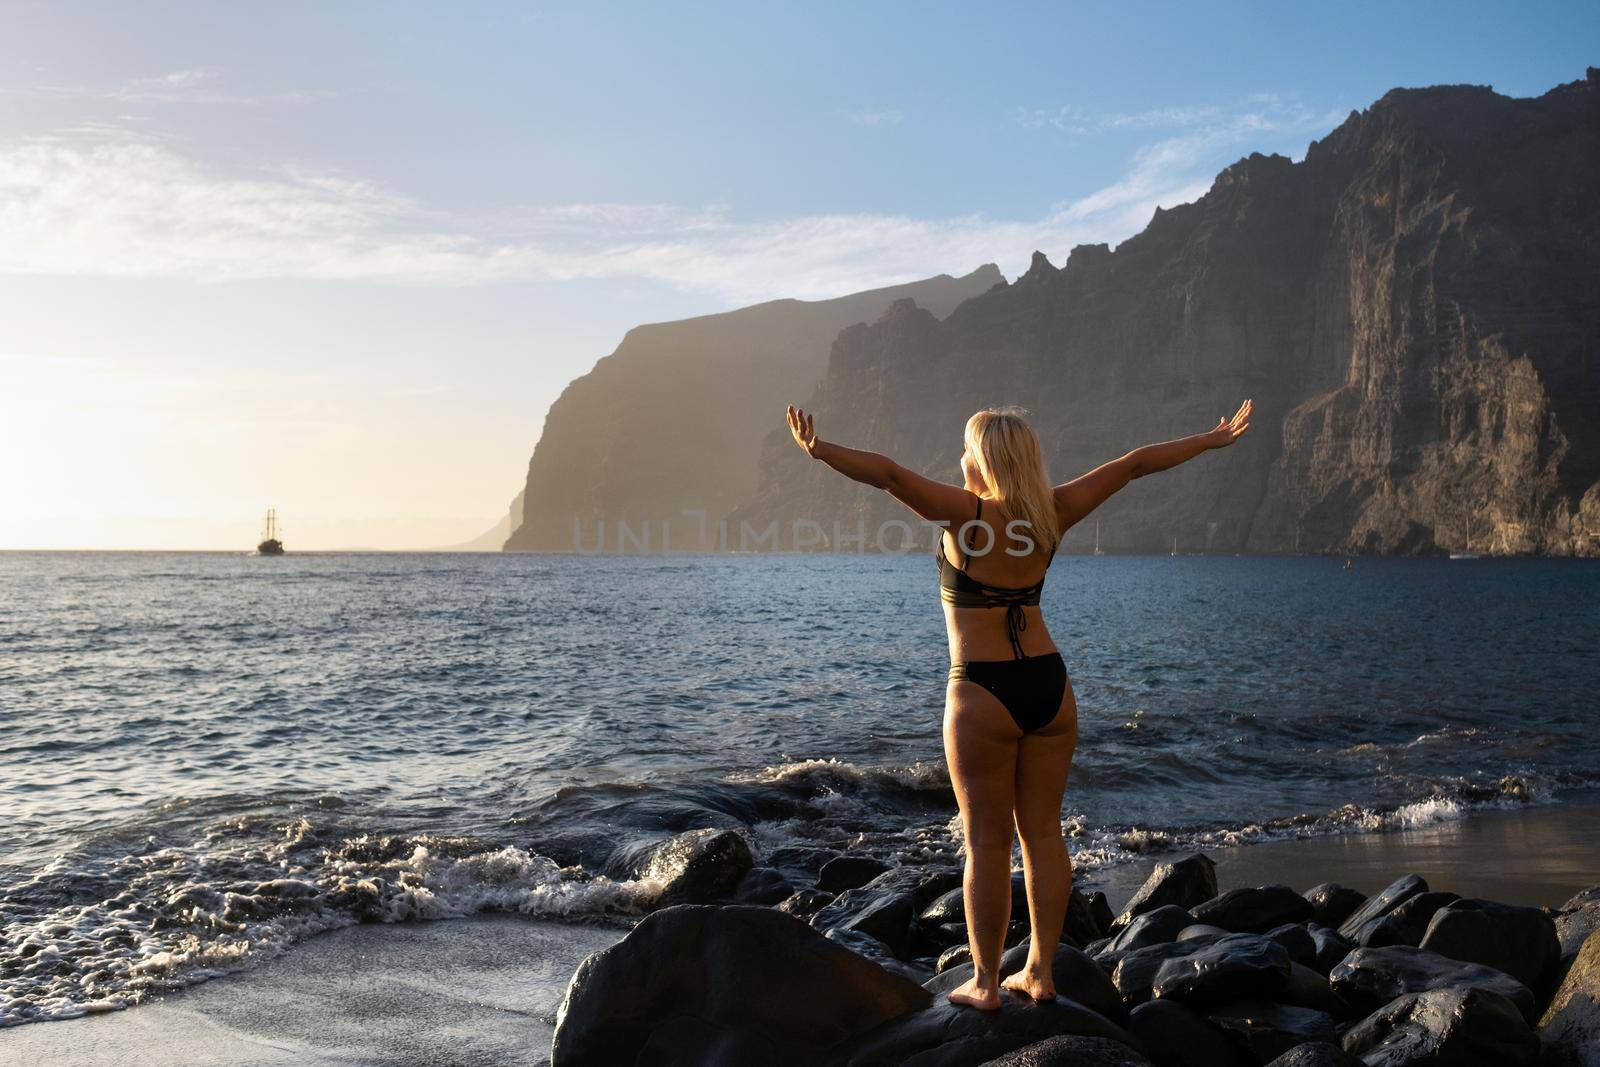 A girl at sunset on the beach near the cliffs of Acantilados de Los Gigantes at sunset, Tenerife, Spain